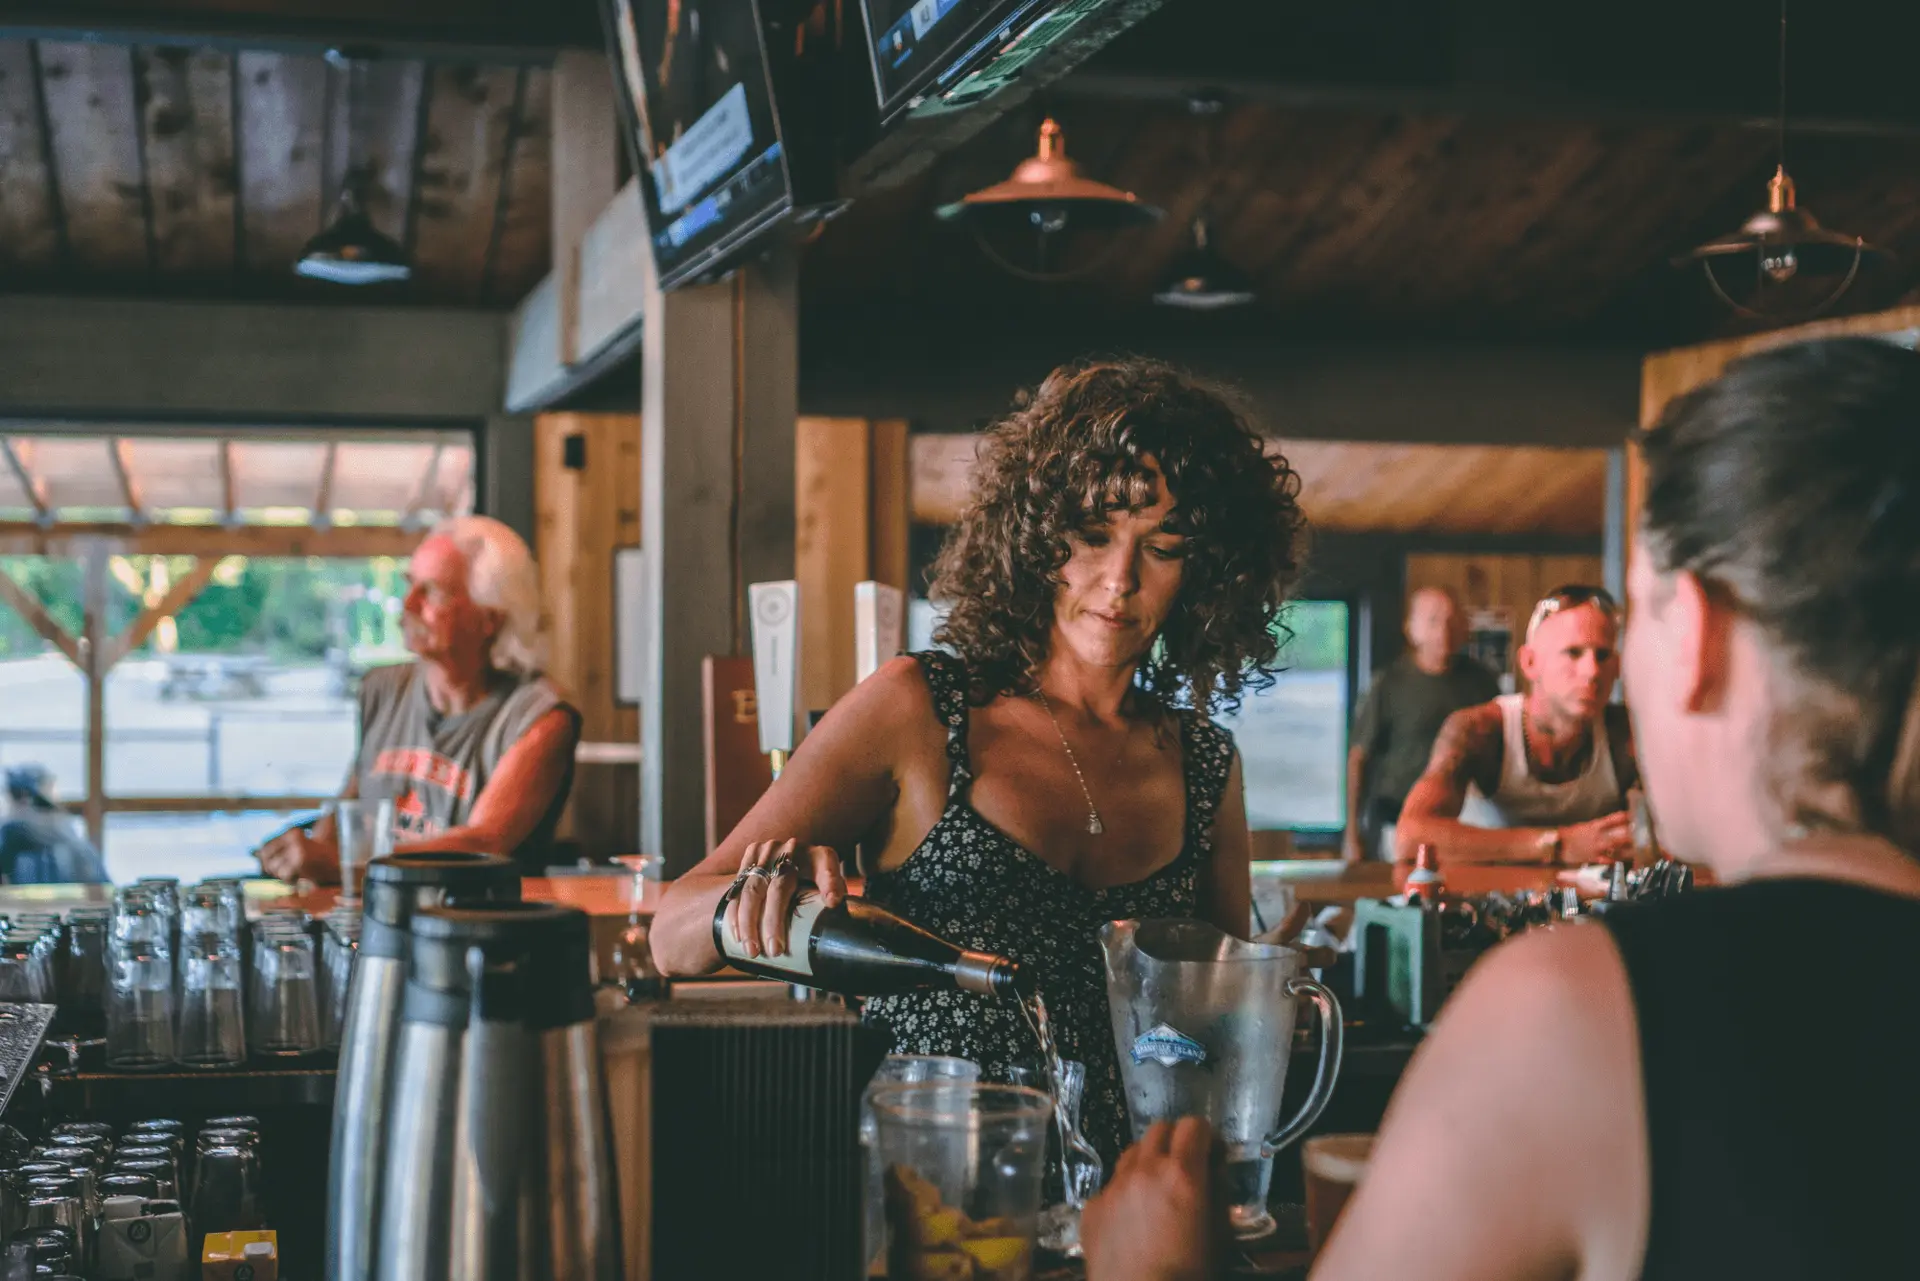 A woman pouring a drink at Port Browning Marina Pub & Cafe in VIctoria, BC